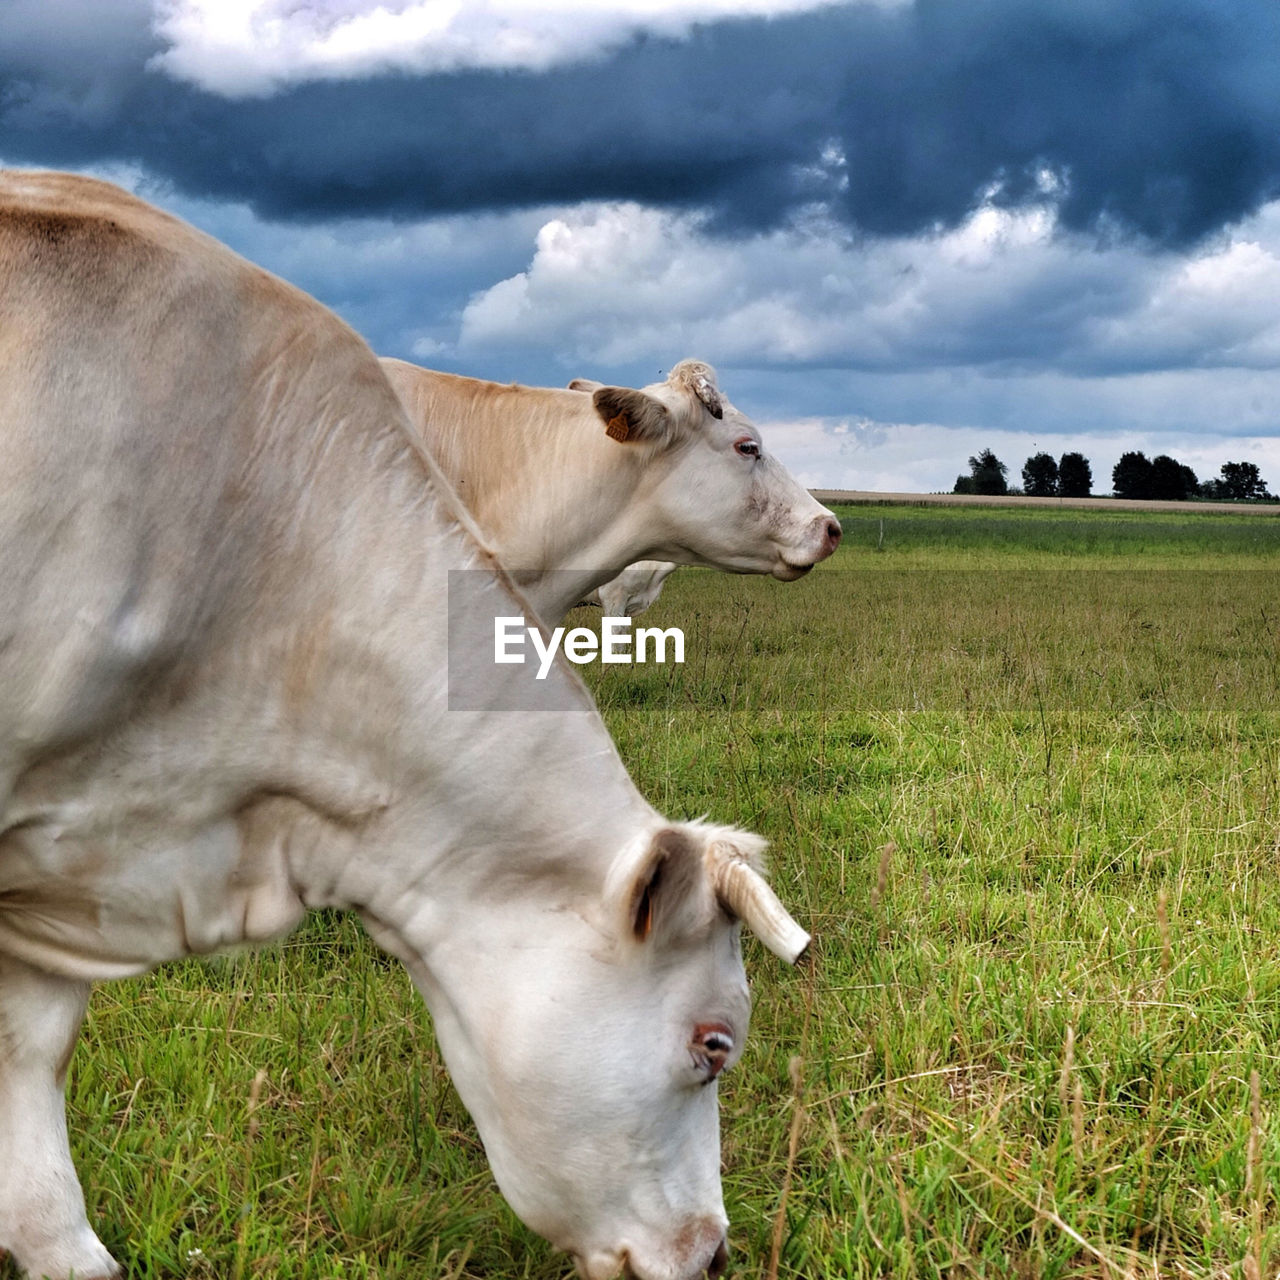 Cows grazing on grassy field against cloudy sky